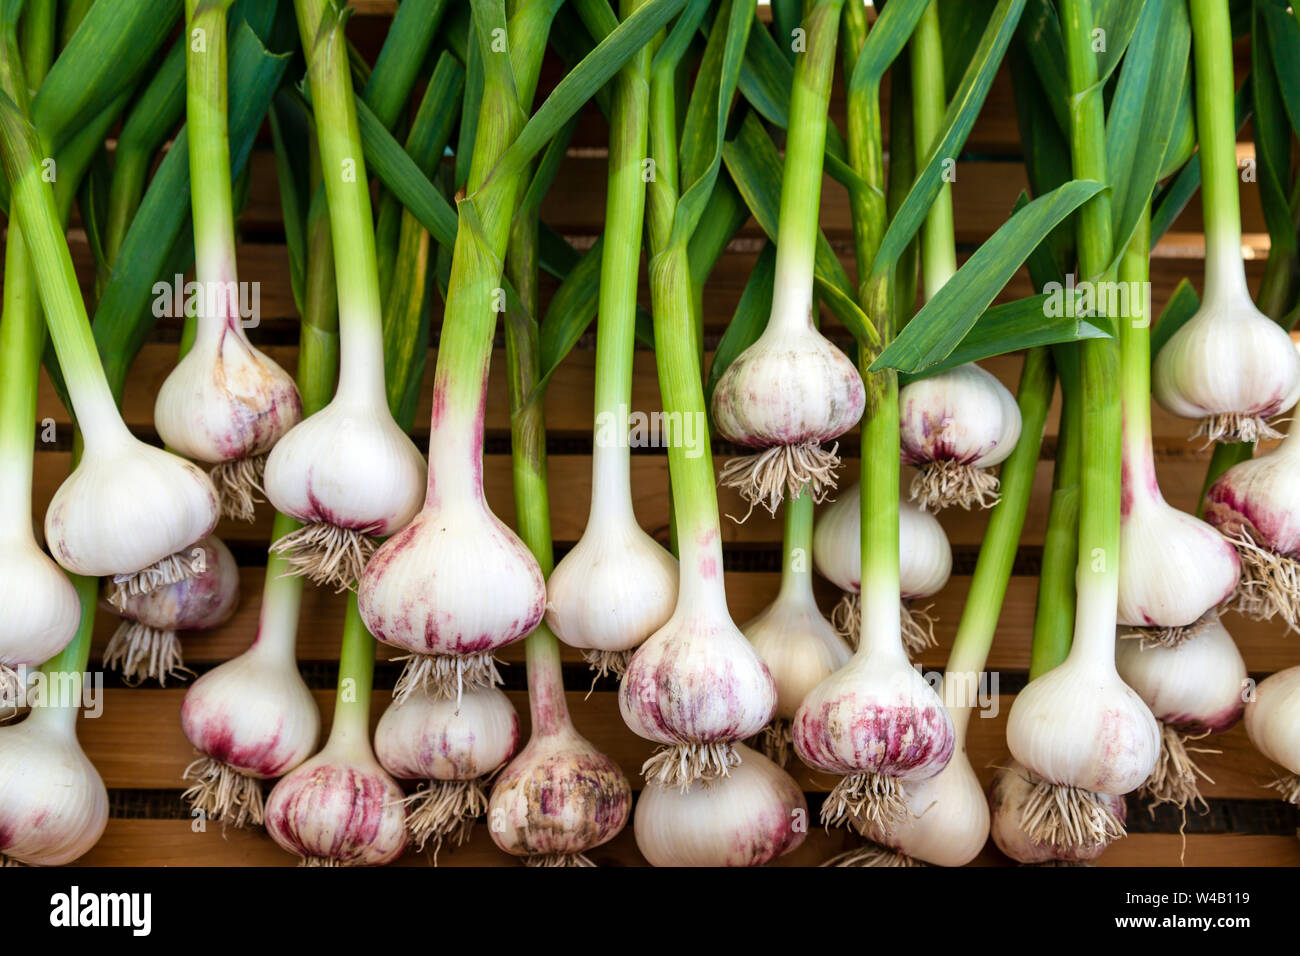 Display of fresh ripe organic red russian garlic bulb at the weekend farmer's market in the Okanagan Valley city of Penticton, British Columbia, Canad Stock Photo